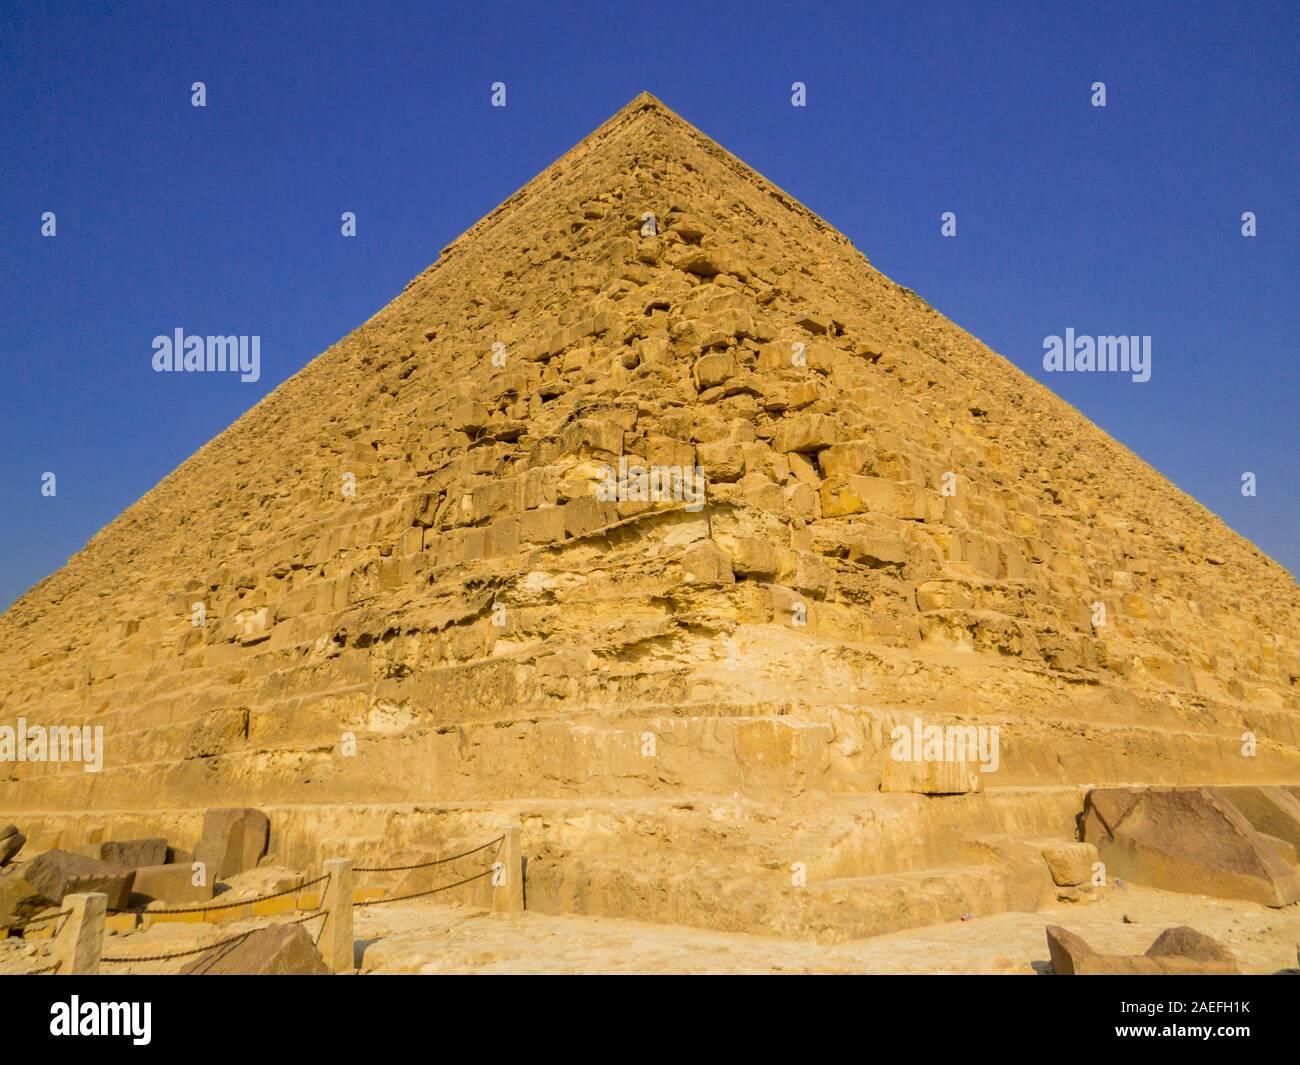 View of the Pyramid of Khafre in the Giza Necropolis. In Cairo, Egypt Stock Photo